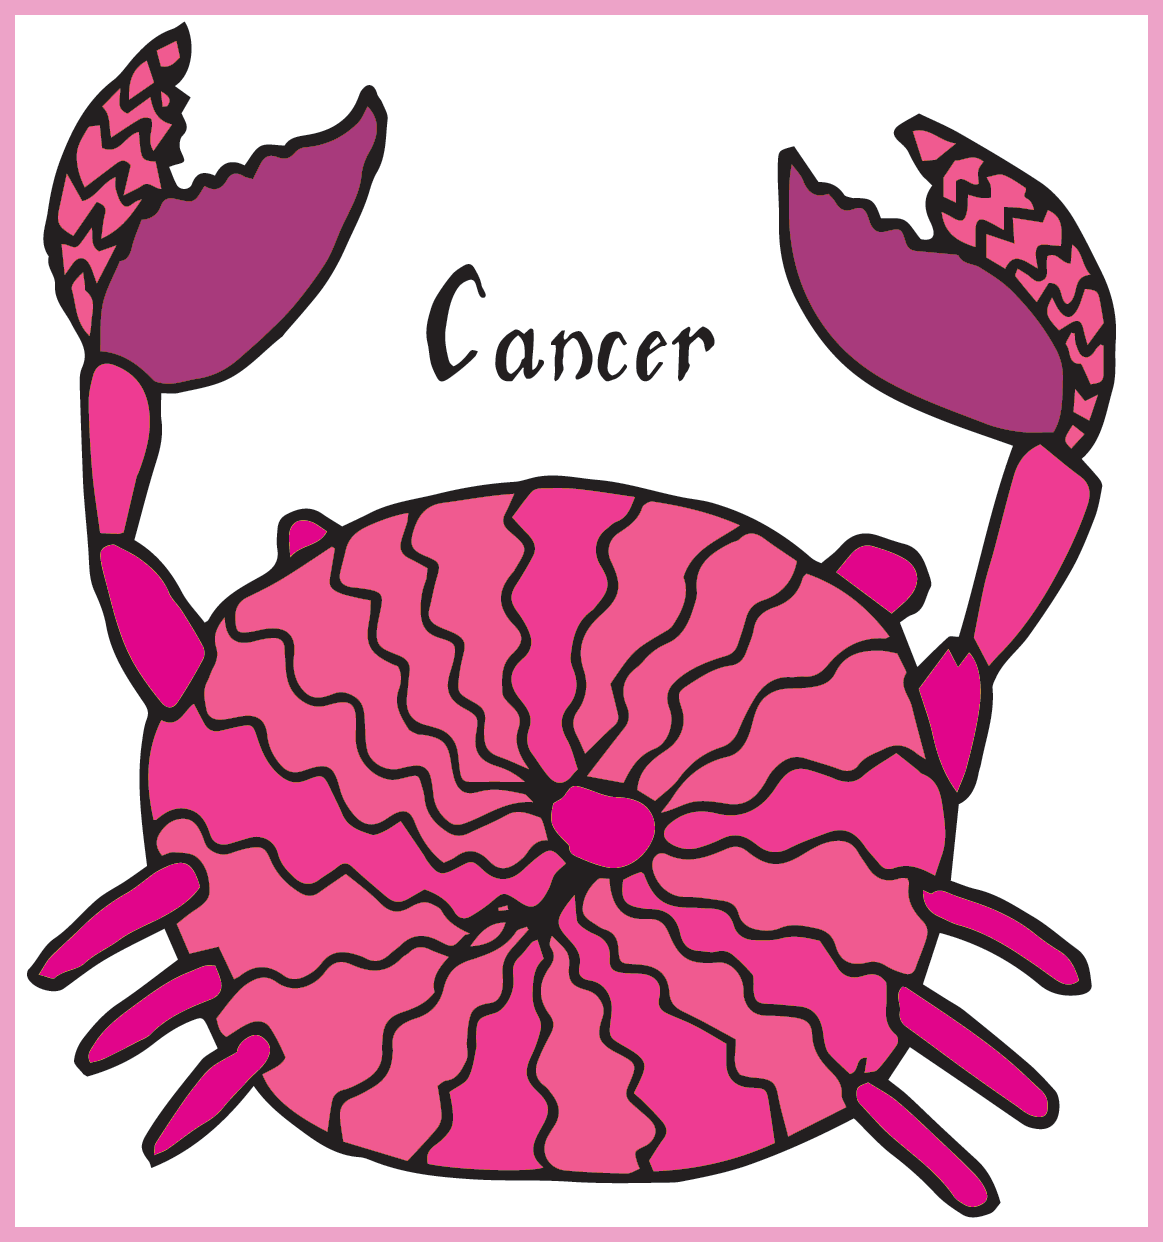 A colorful crab in many different shades of pink with large pincers